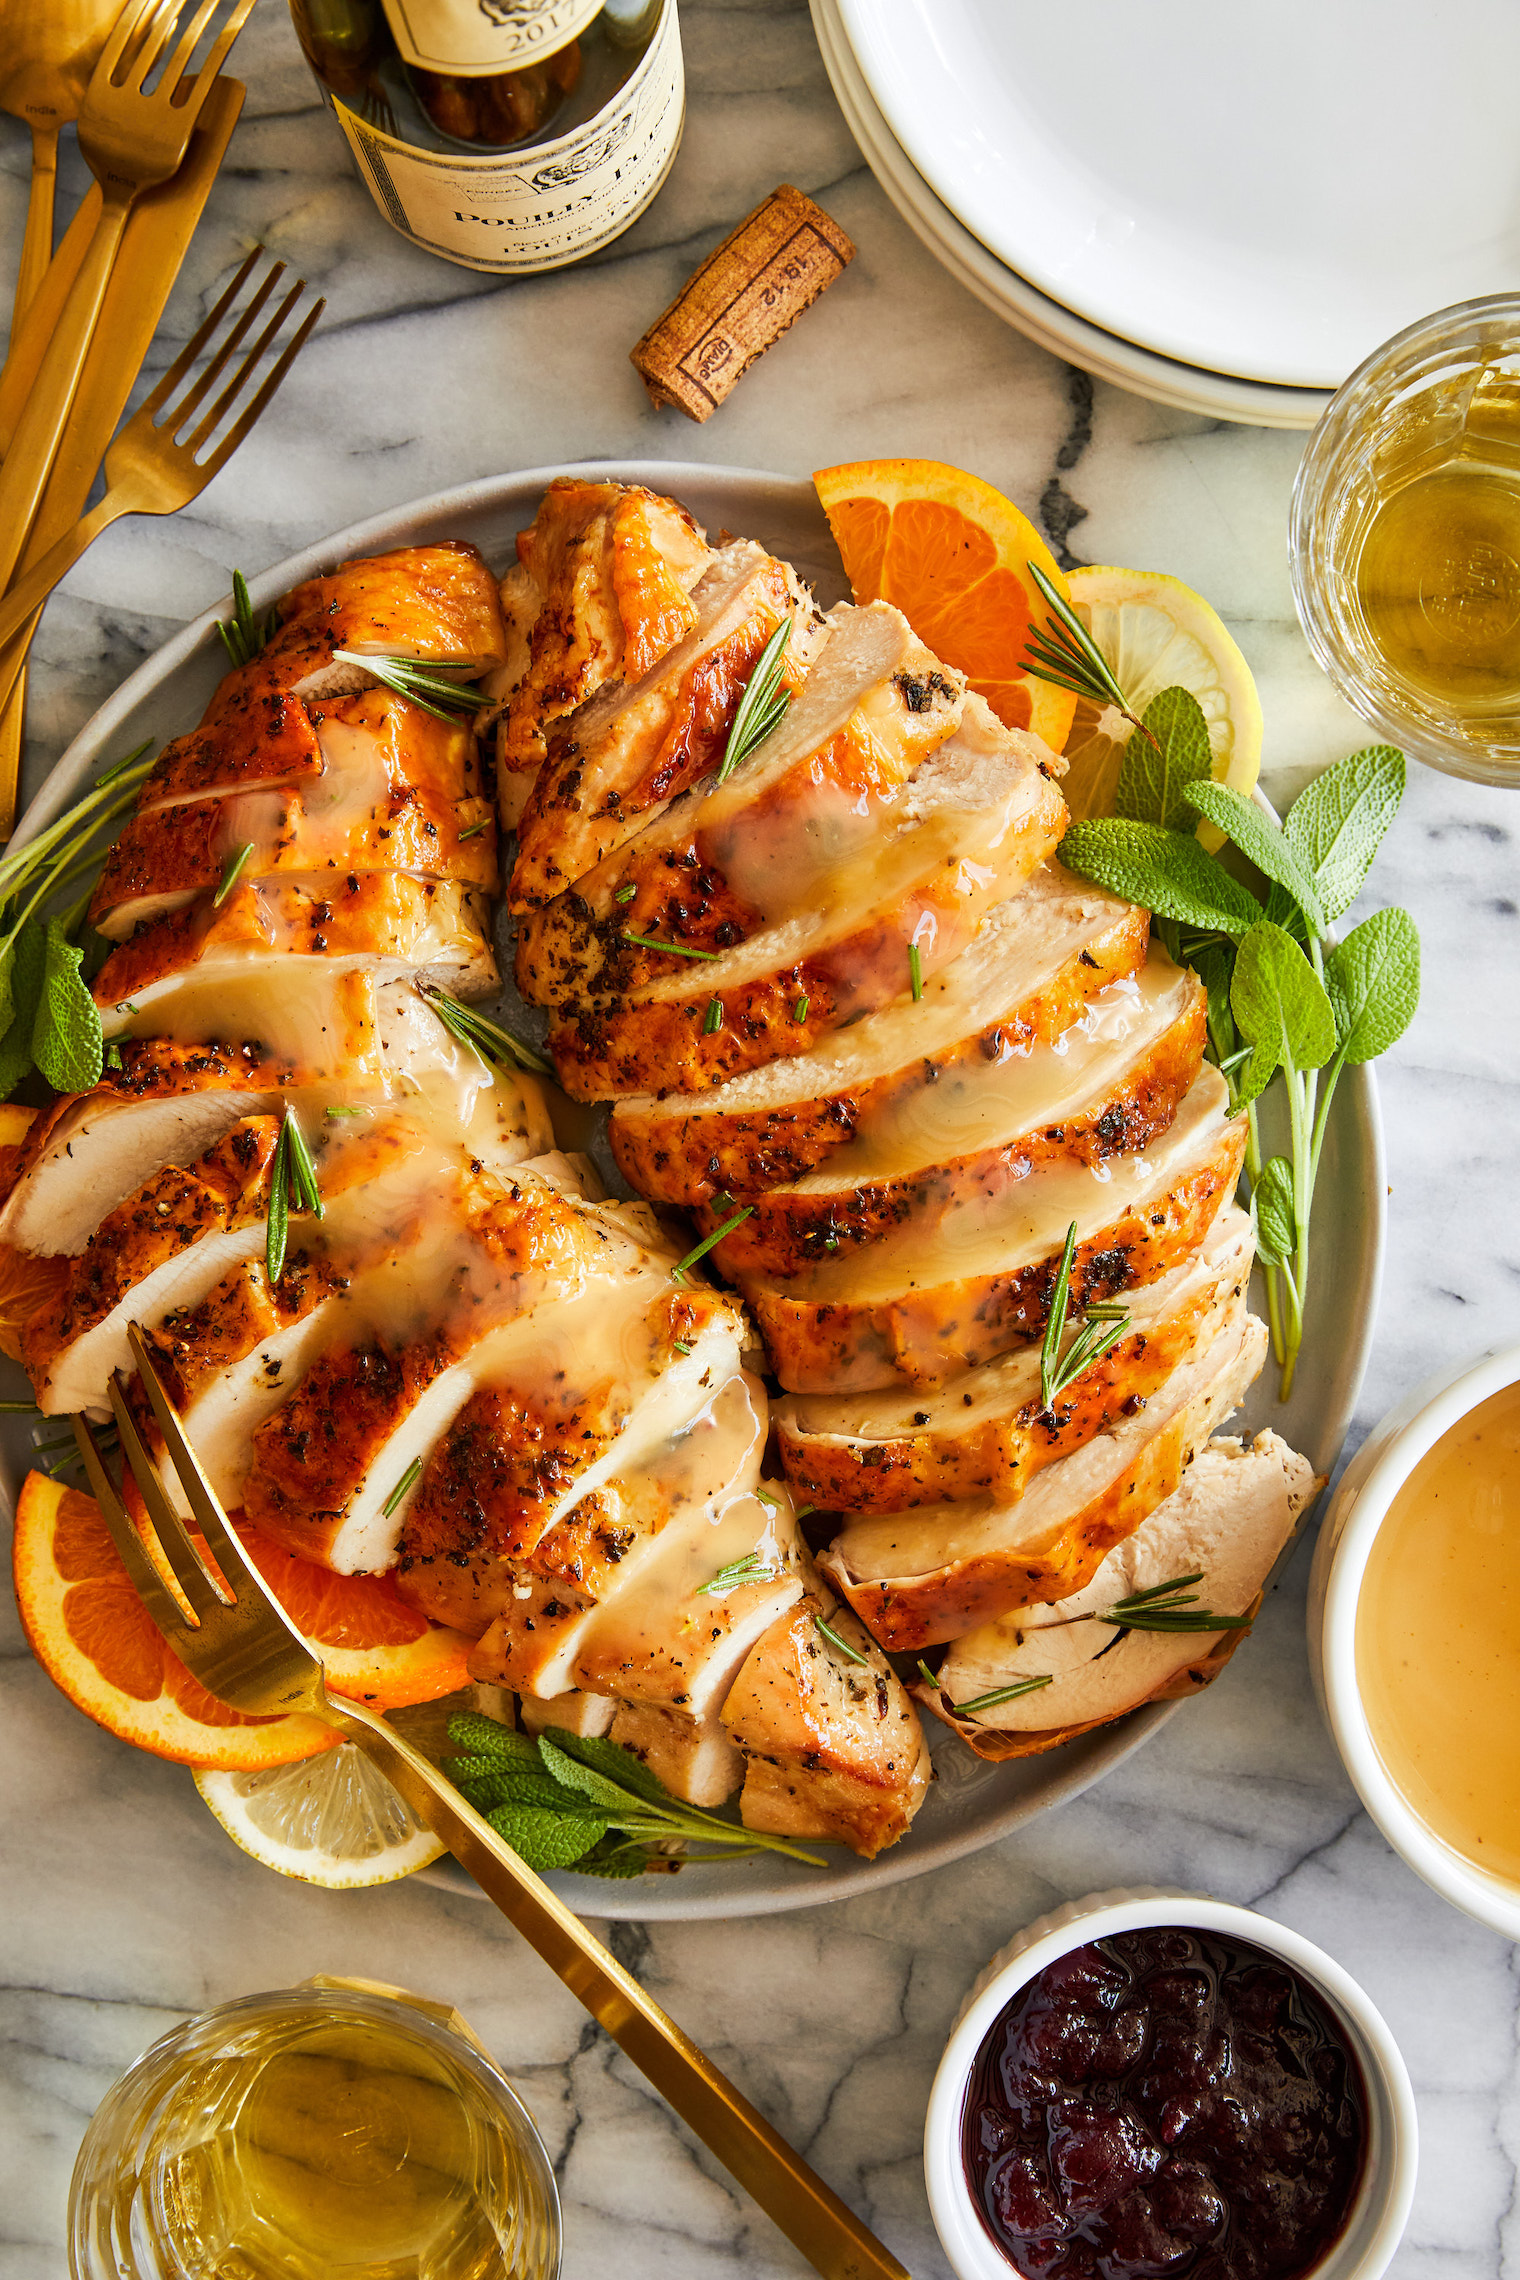 https://s23209.pcdn.co/wp-content/uploads/2021/11/211015_DAMN-DELICIOUS_Herb-Roasted-Turkey-Breast_375.jpg